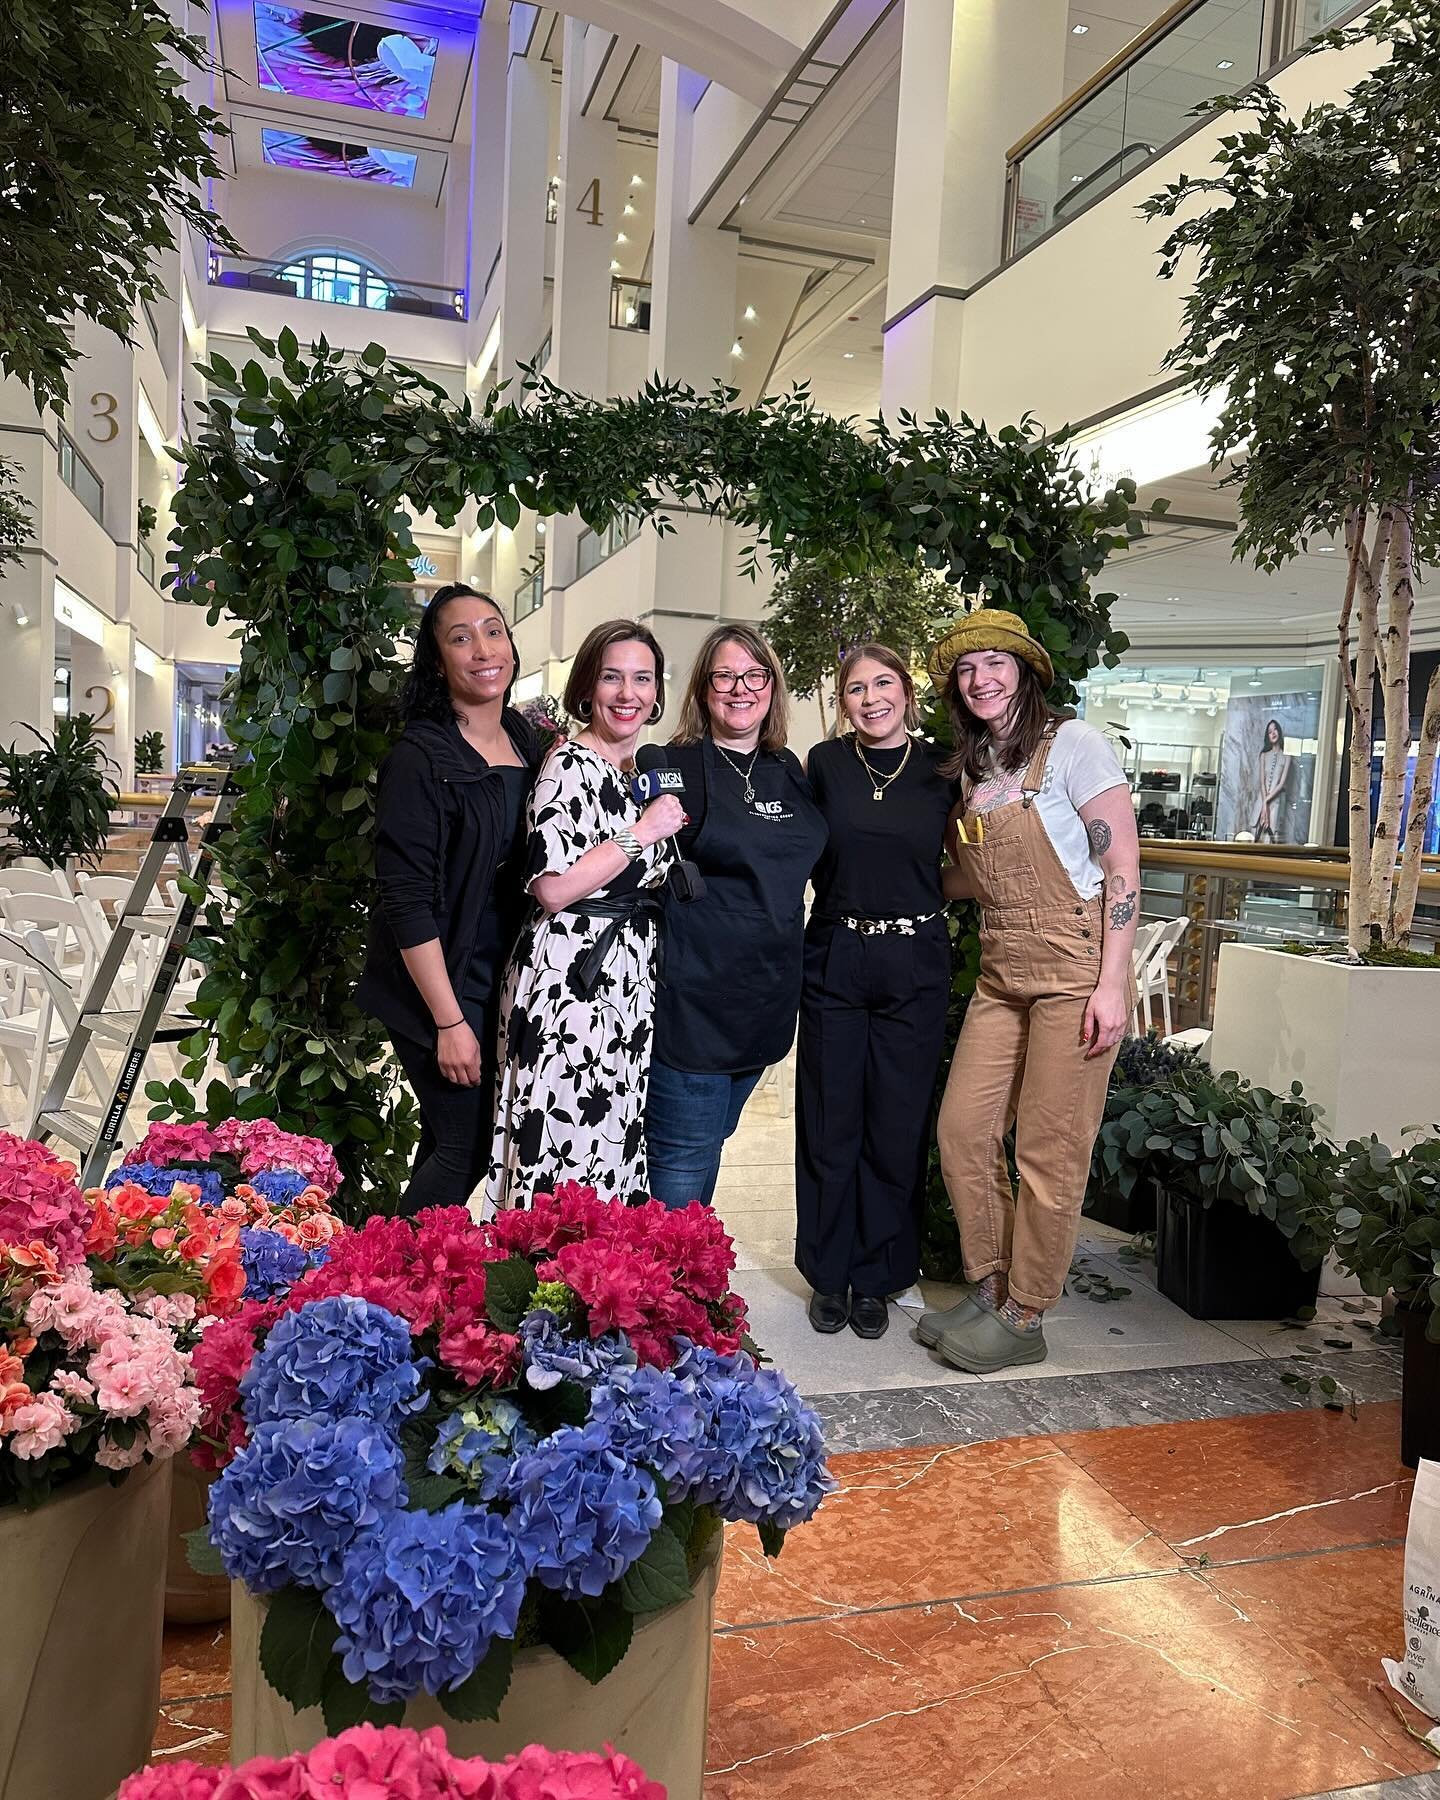 Thank you so much to @wgnmorningnews for supporting @fleursdevilles Artiste @900shops. We appreciate your dedication to all things local And having fun!

#aroundtown #chicago #city #thingstodo #weekendplans